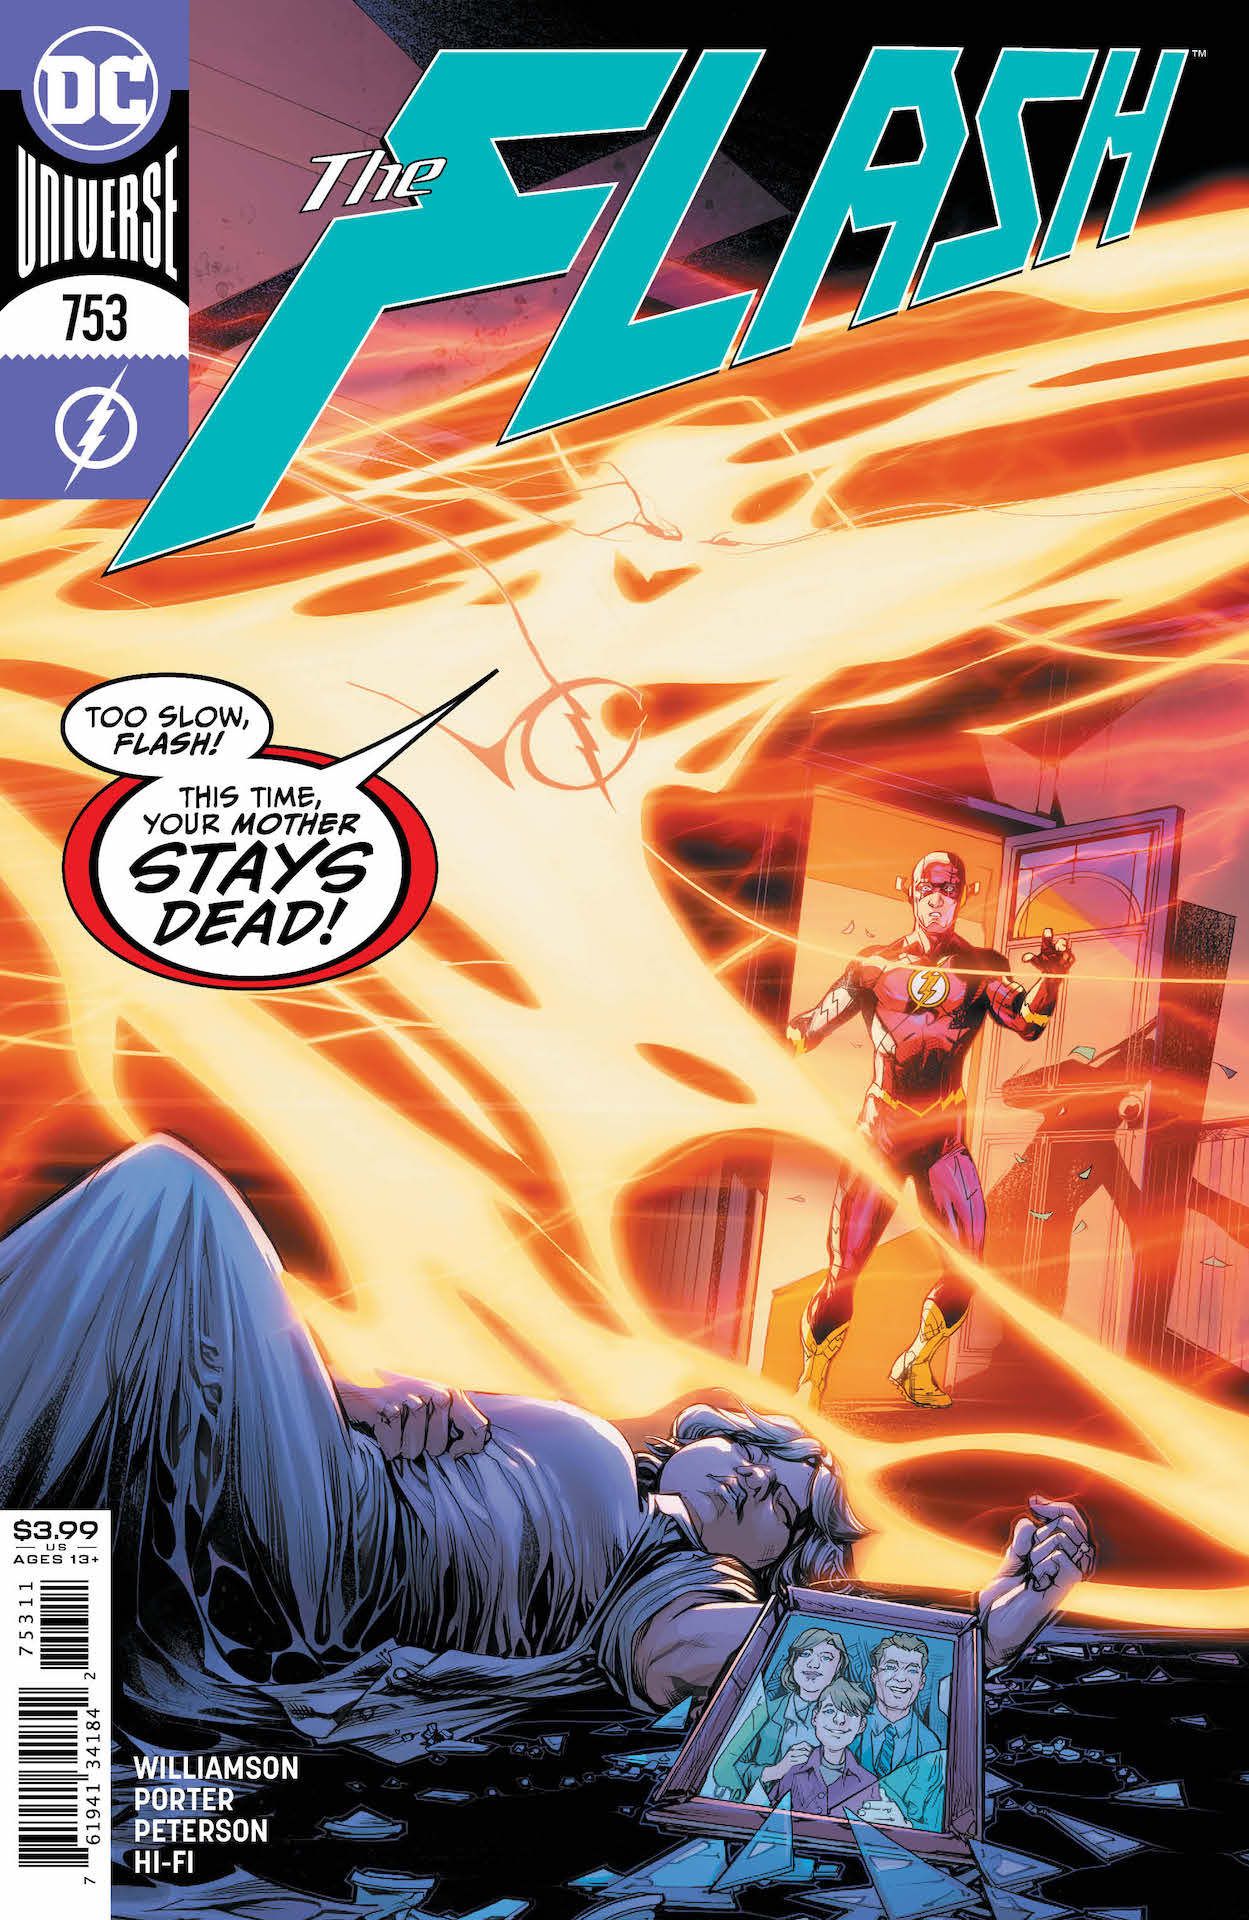 DC Preview: Flash #753